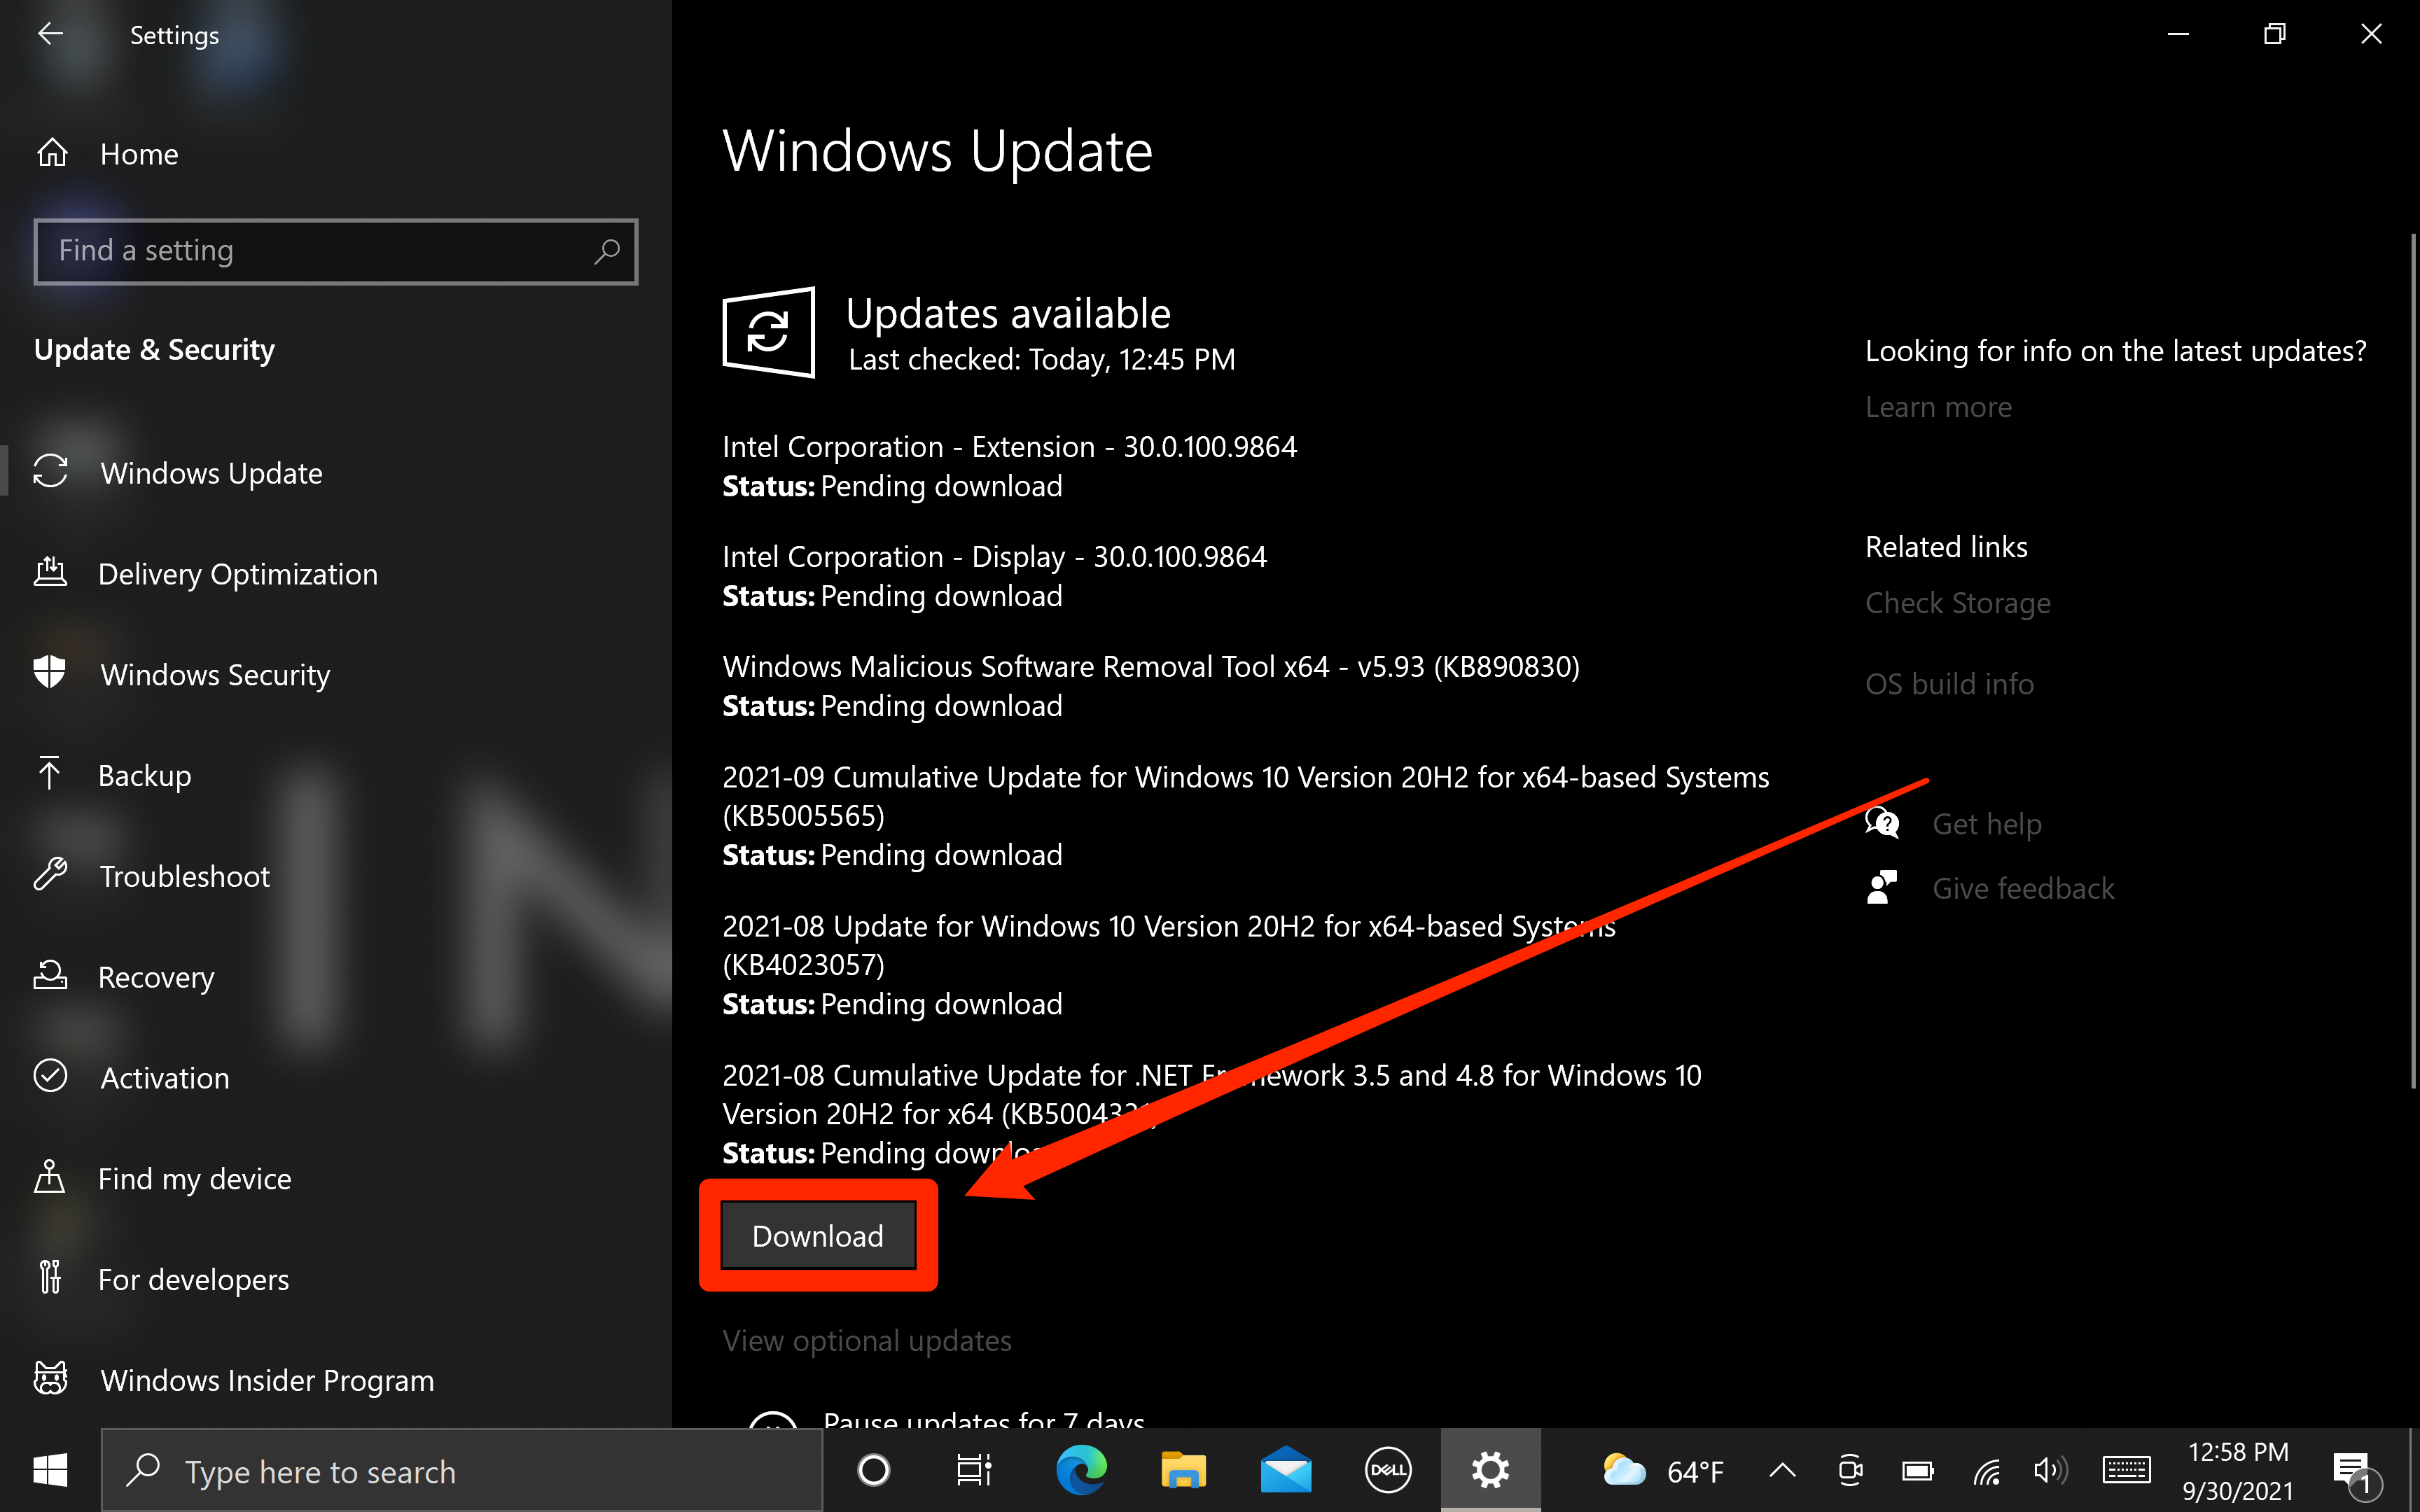 The Windows 10 updates menu. The Download option is highlighted.